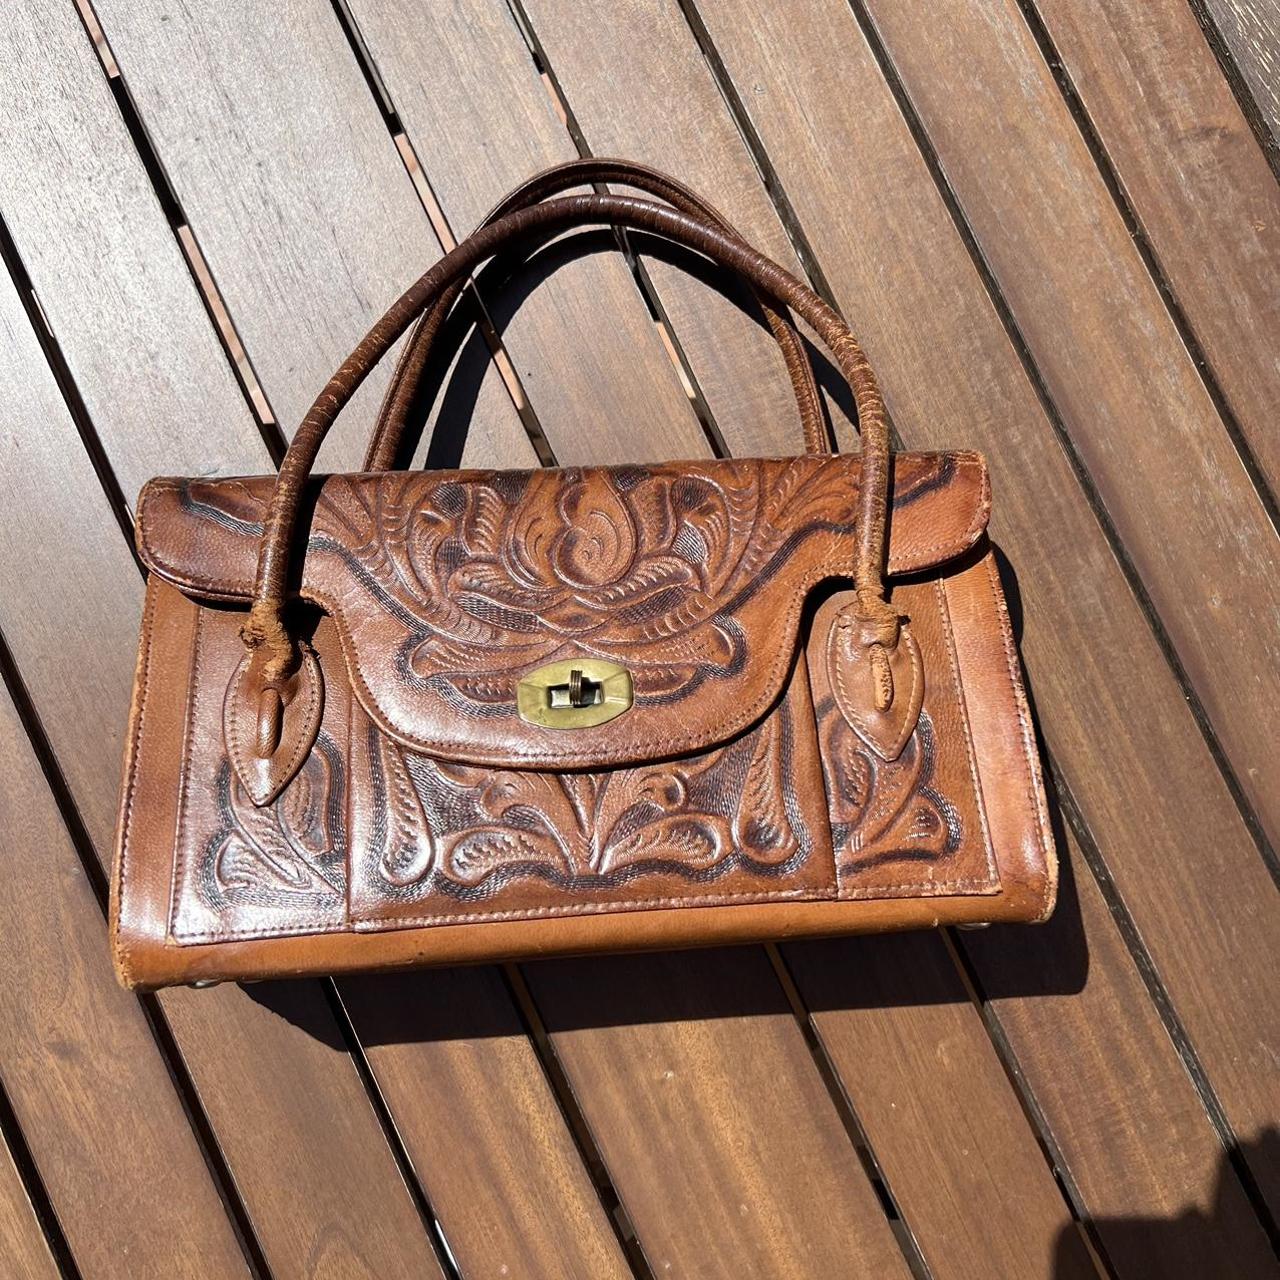 Hand-tooled Leather Tote Bag, Brown Leather Bag, joana by ALLE, Western  Style, Tooled Purse, Country Style, Shoulder Bag,, Holiday Gifts - Etsy |  Brown leather bag, Vintage leather handbag, Leather tote